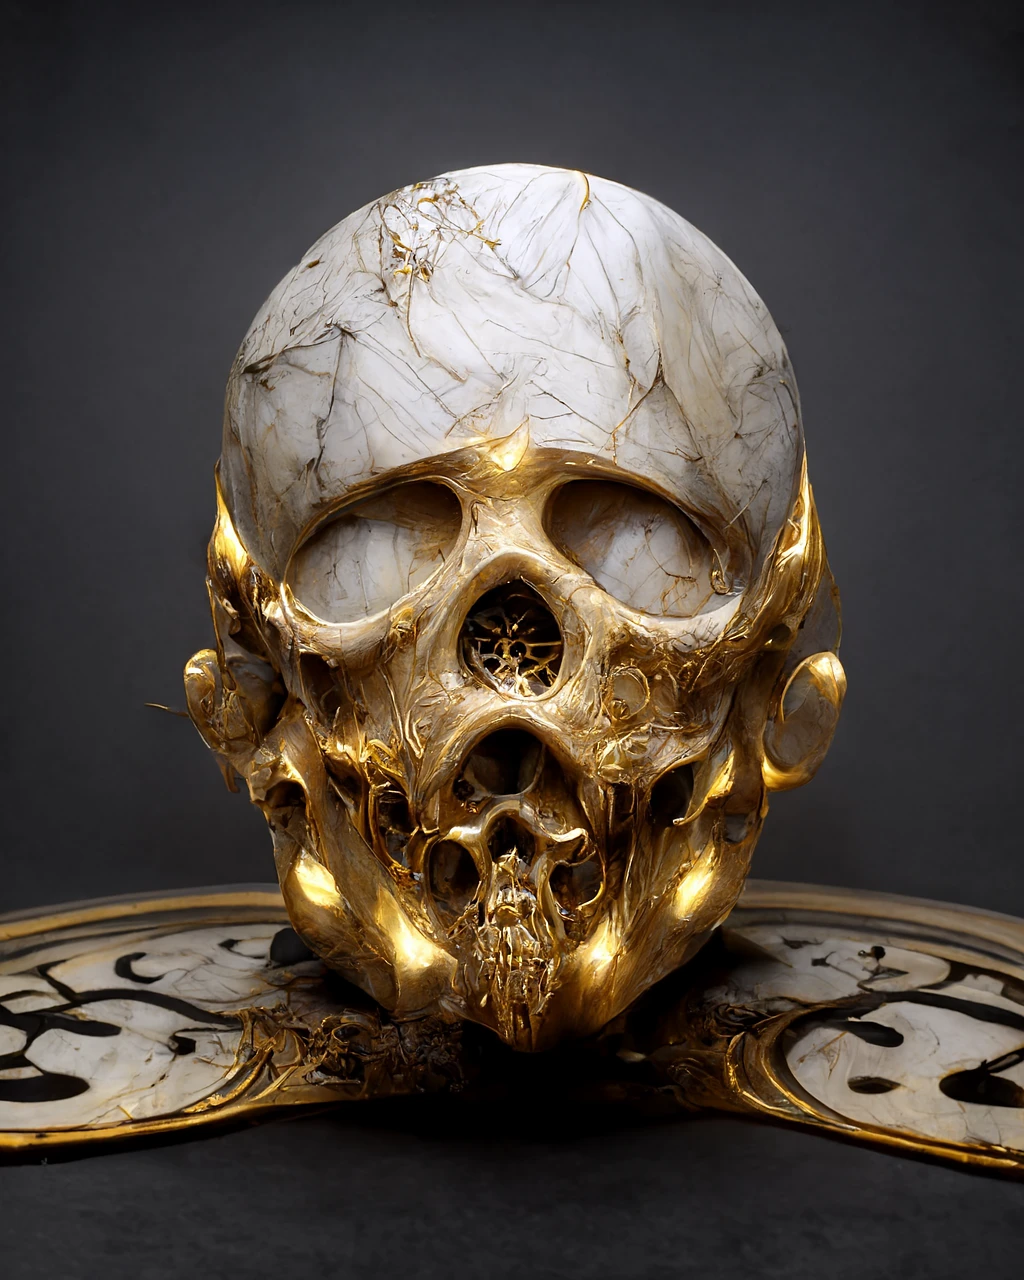 Marble Sculptures and Golden Skull Clock: A Radiant Display